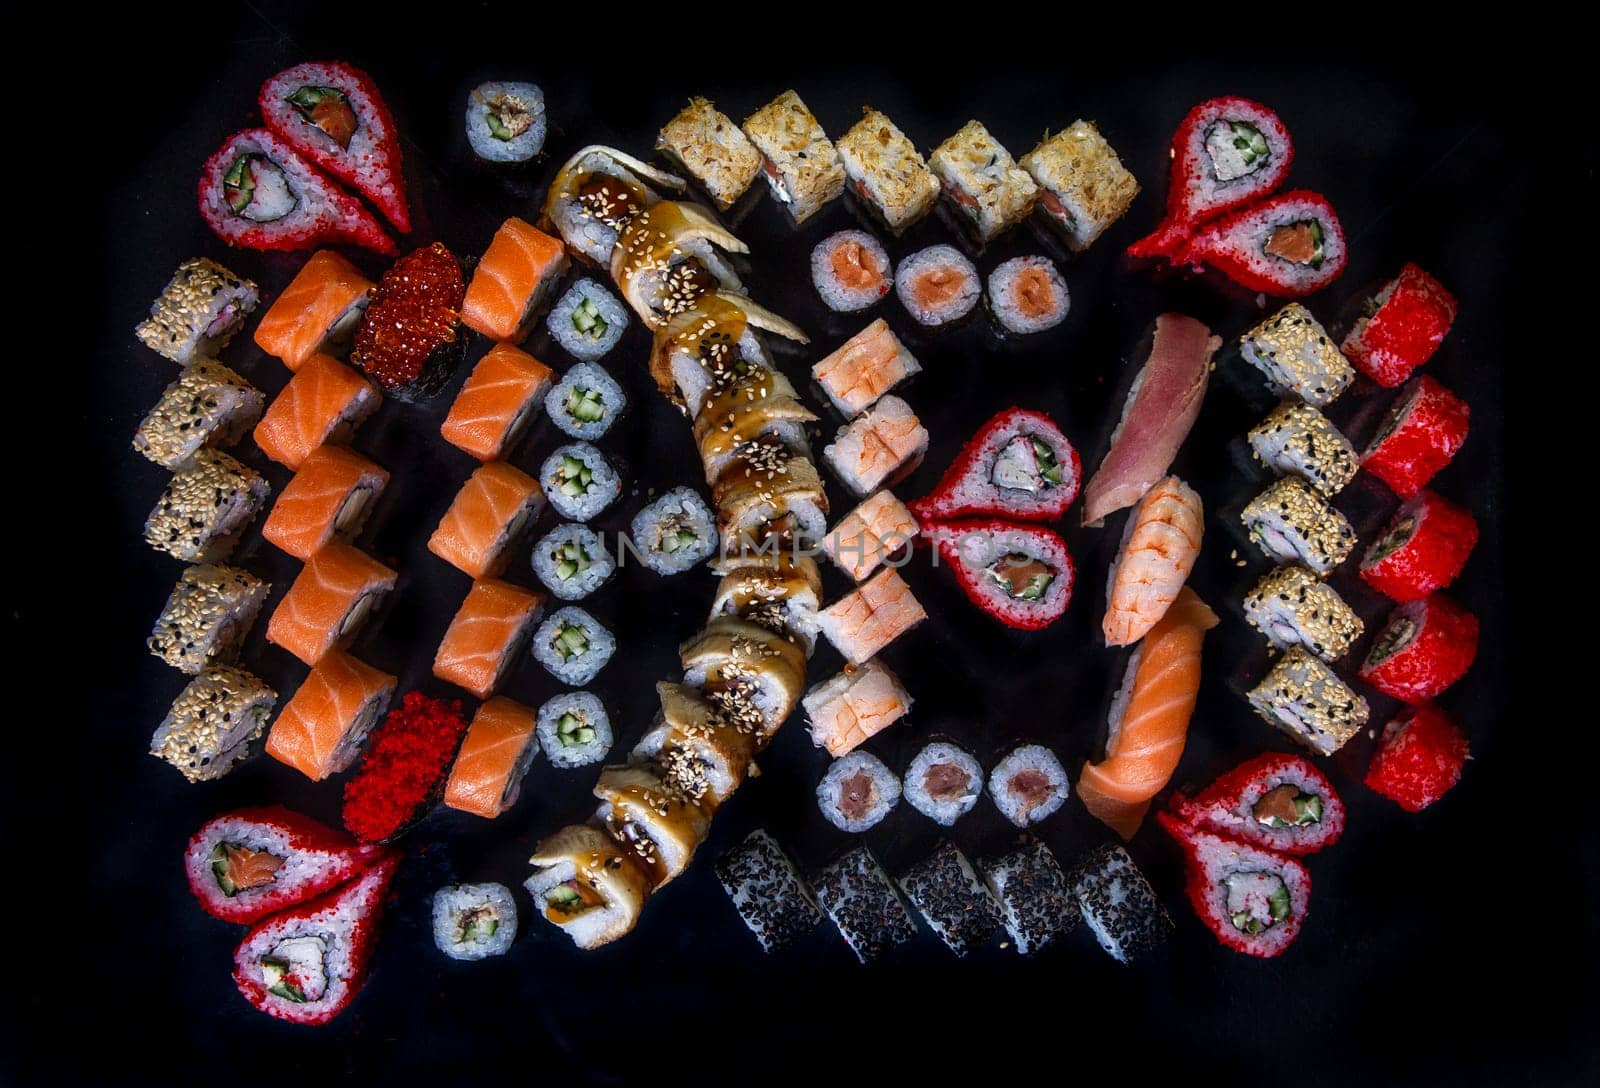 large set sushi and rolls japanese cuisine top view on black background.